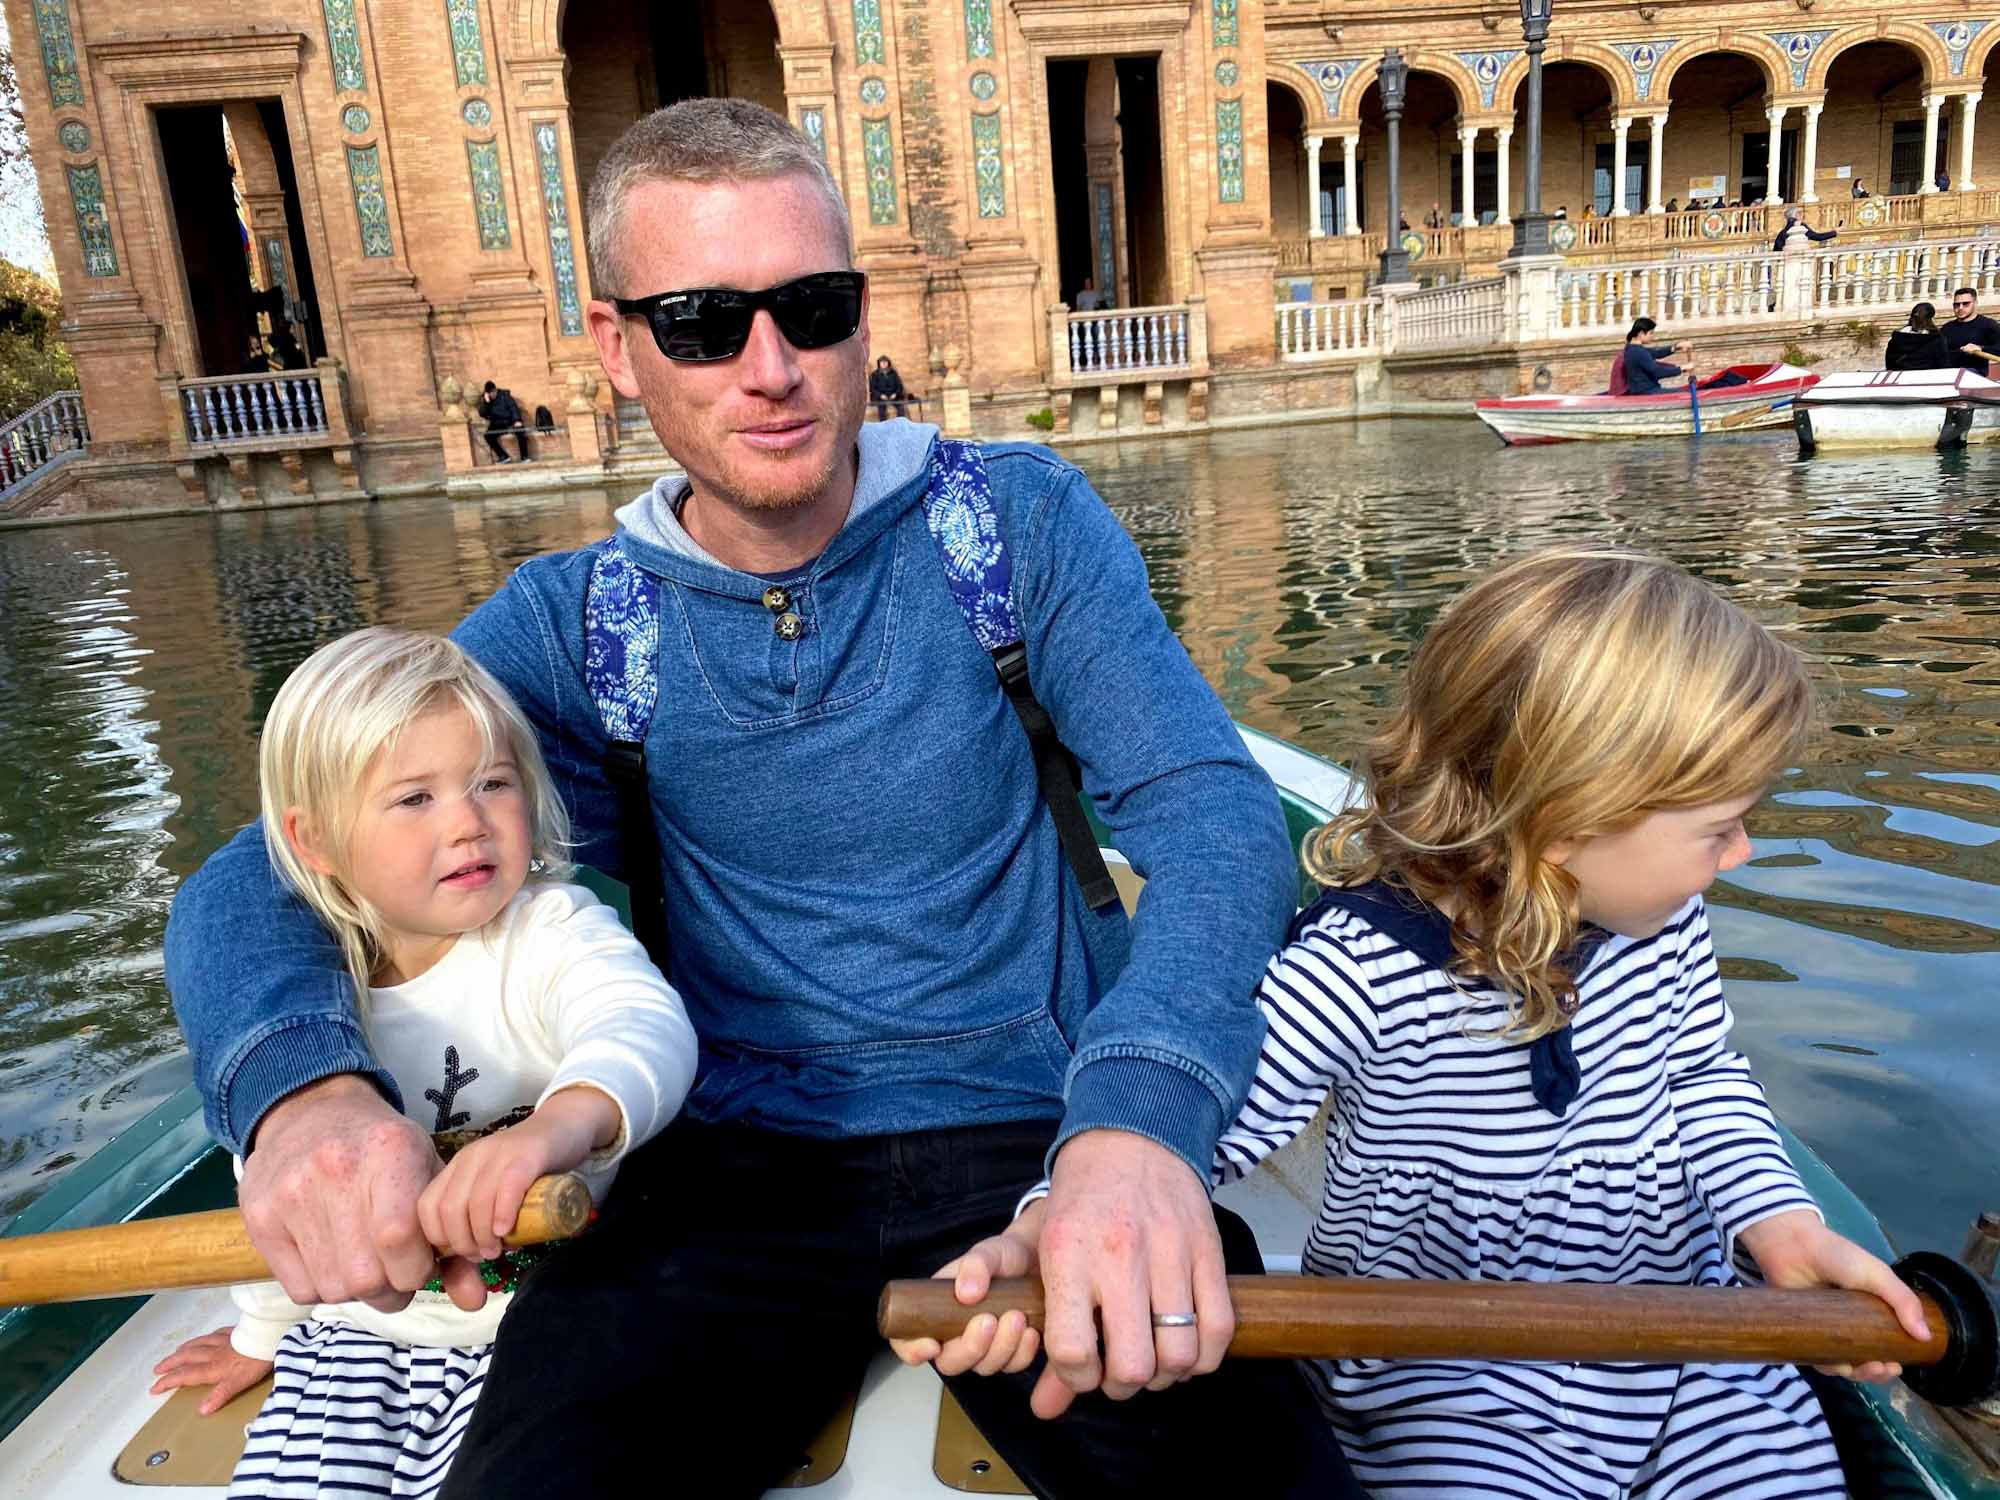 Father and 2 daughters rowing a boat on an ornamental lake